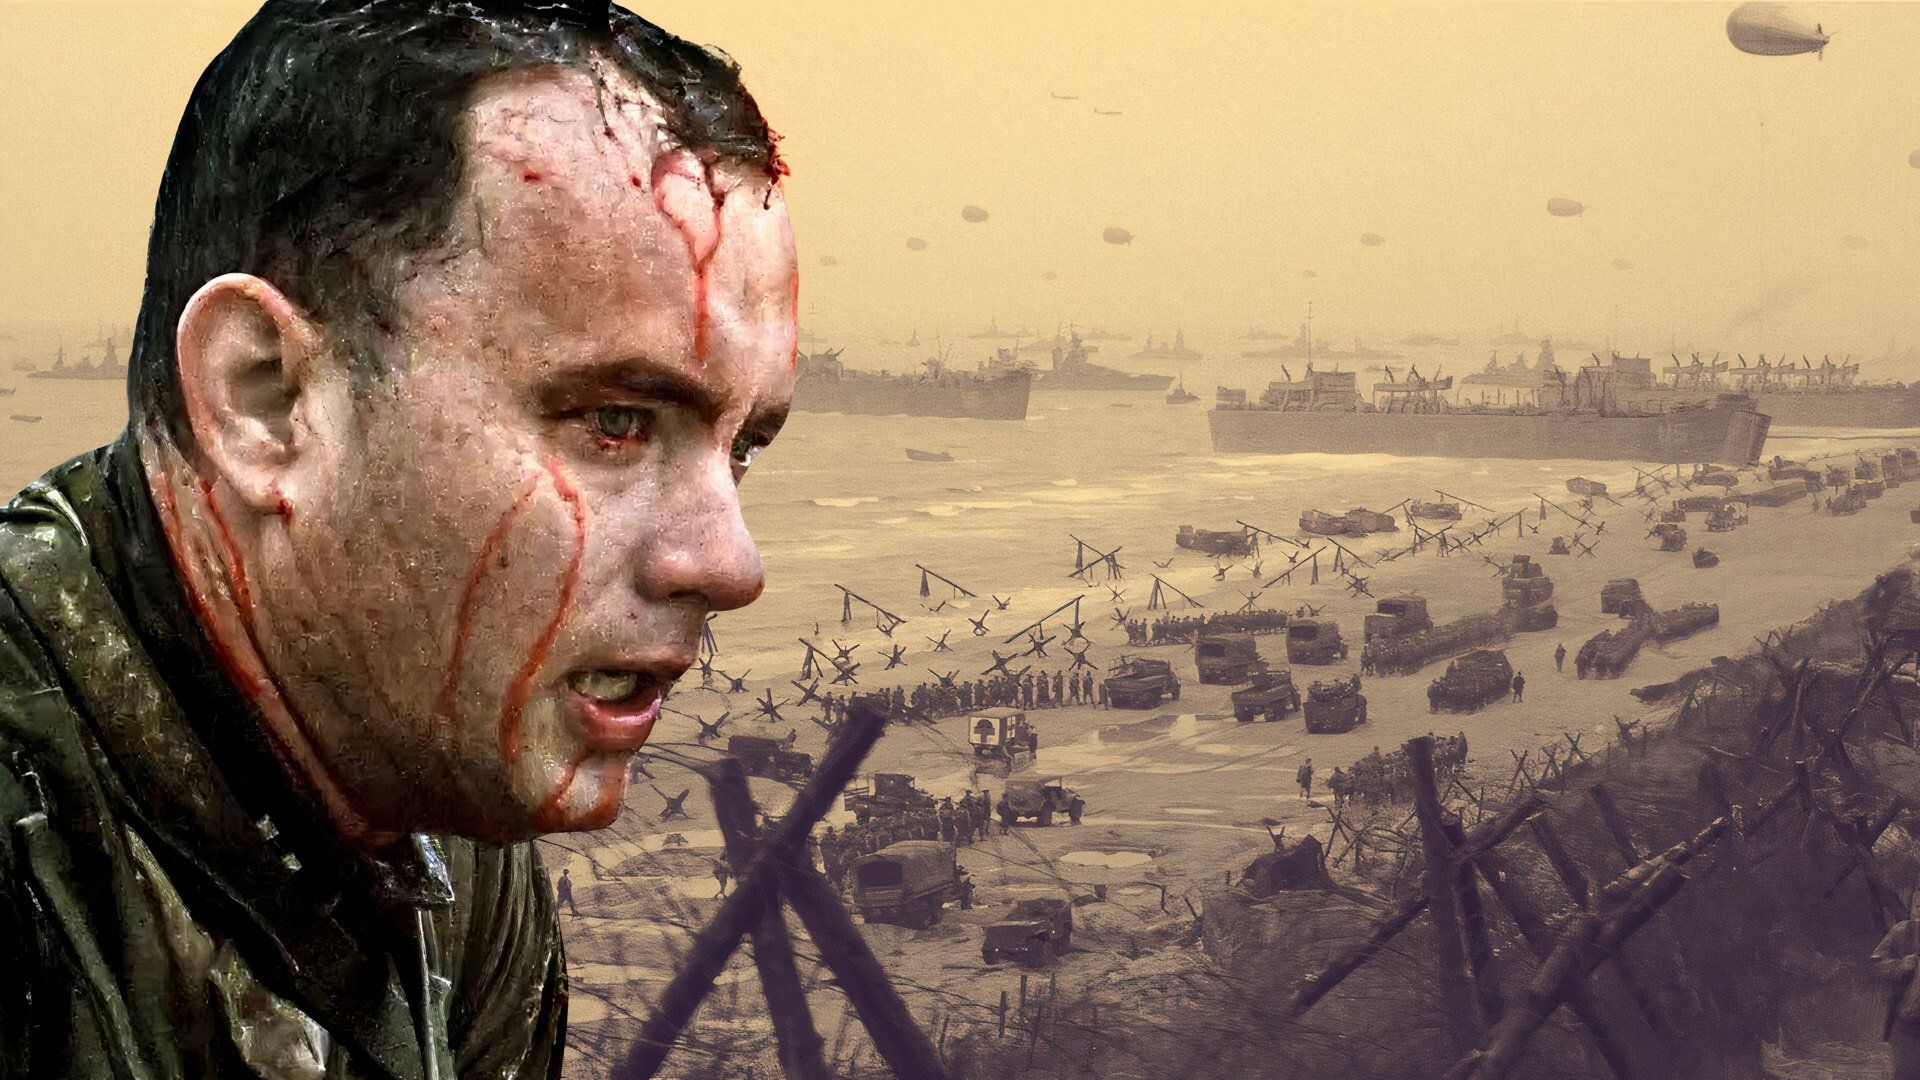 An edited image of Tom Hanks with blood dripping down his face on the beaches of Normandy in Saving Private Ryan